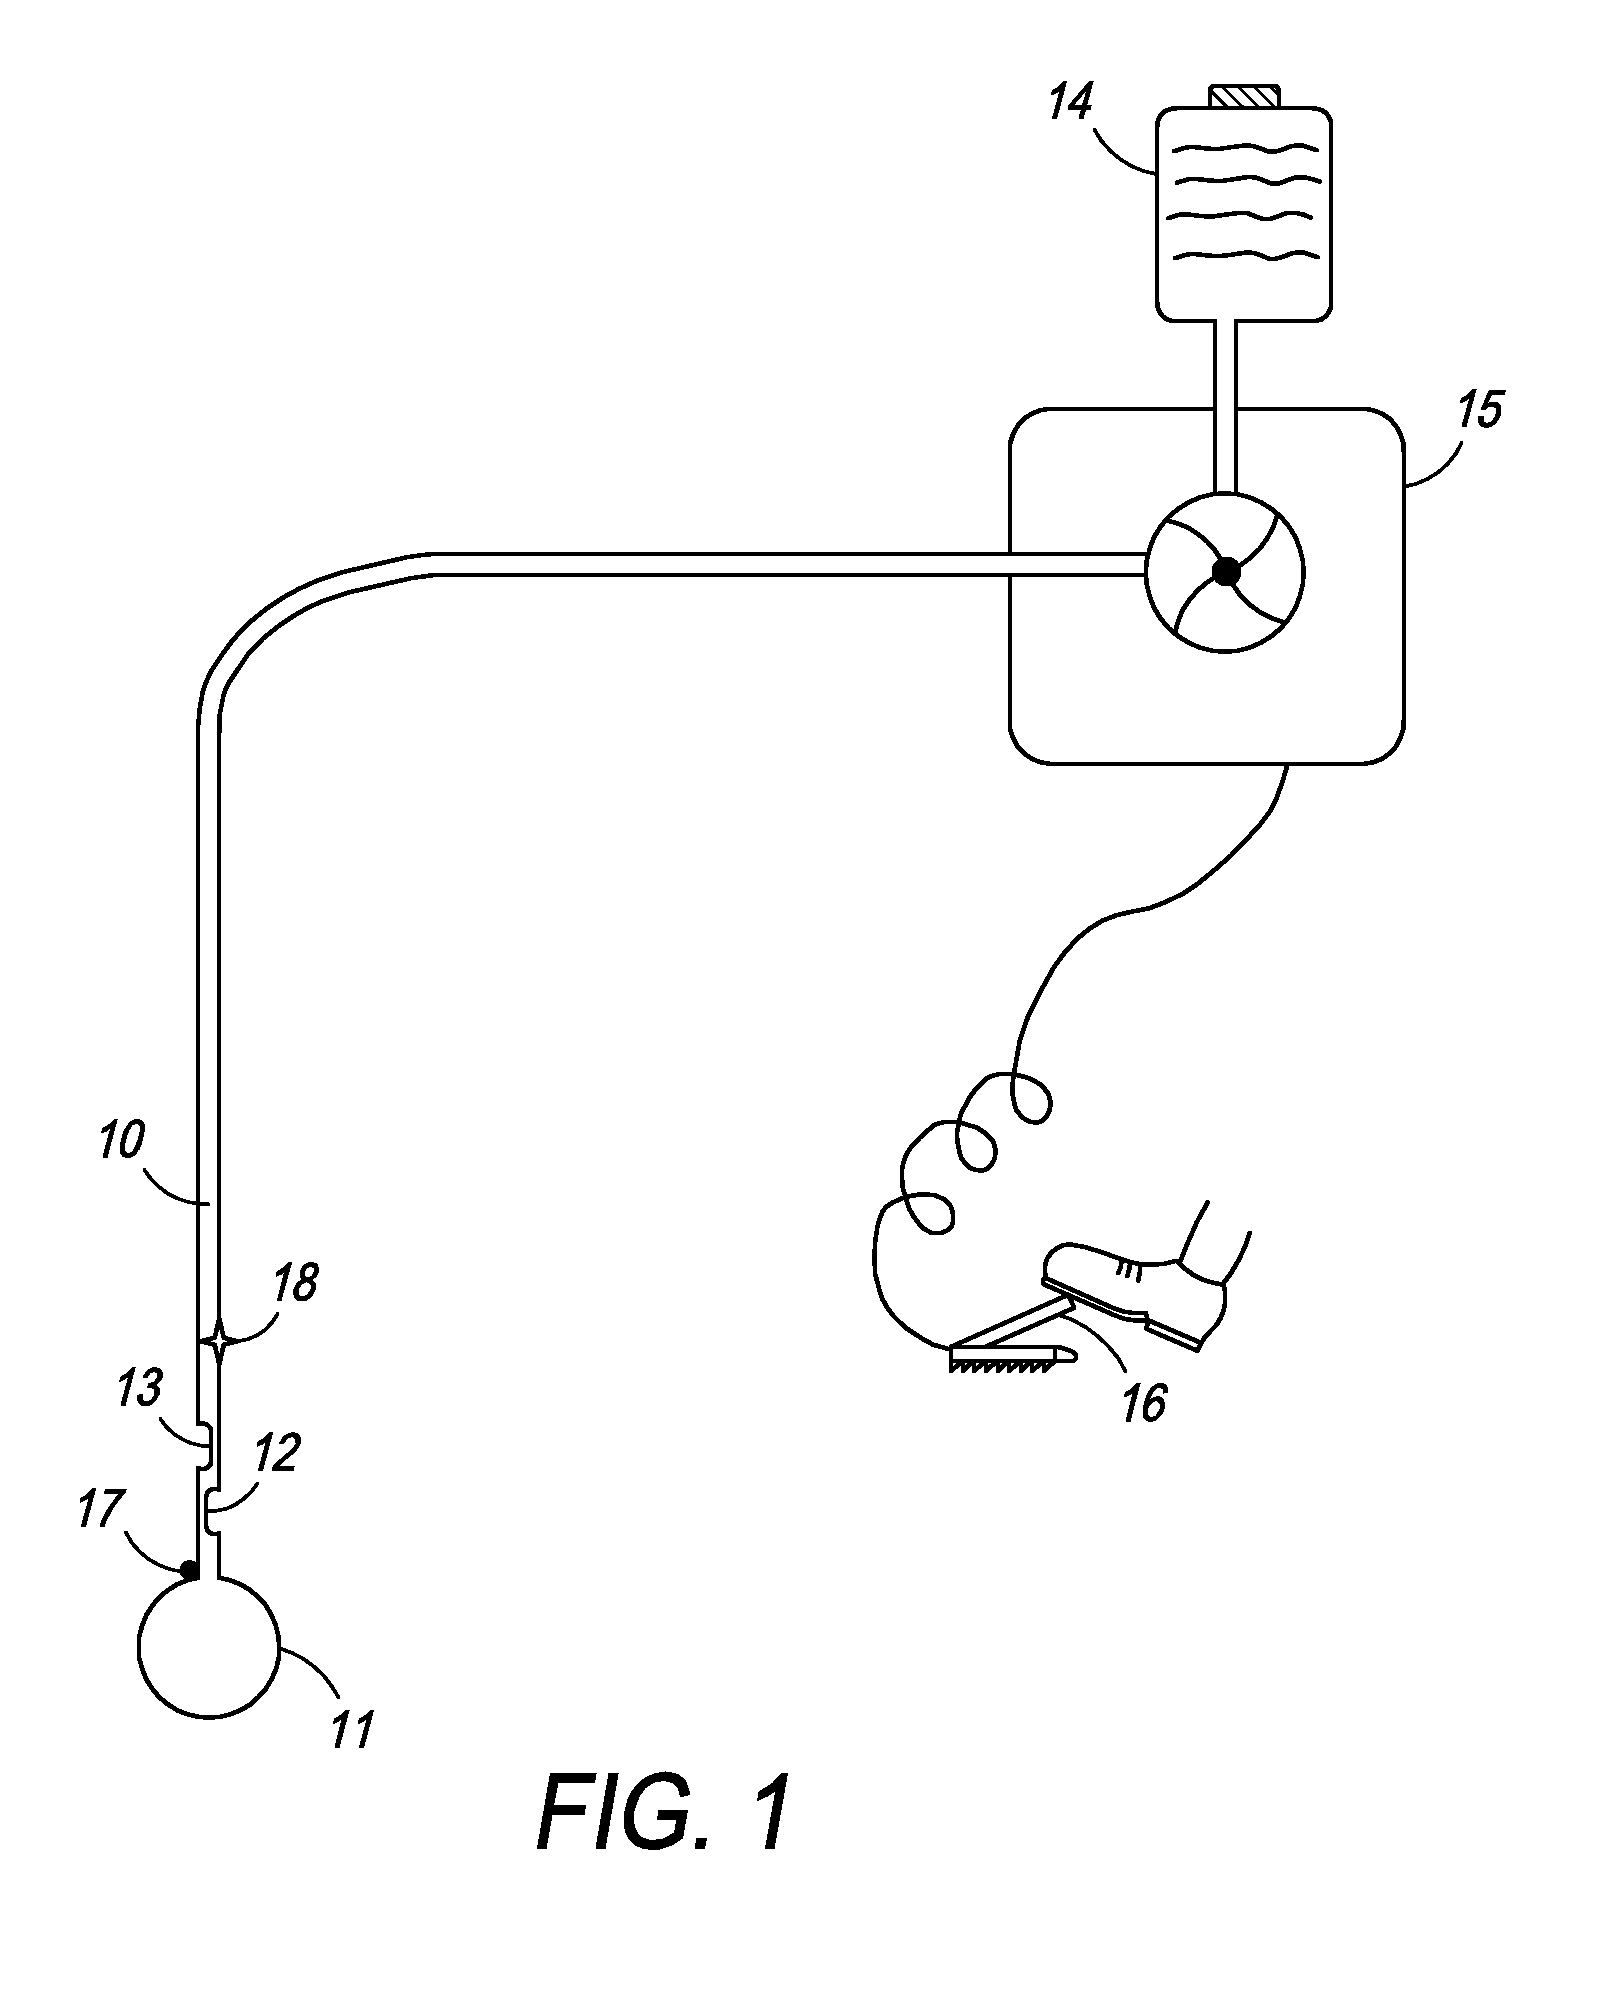 Method and Apparatus for the Ablation of Gastrointestinal Tissue